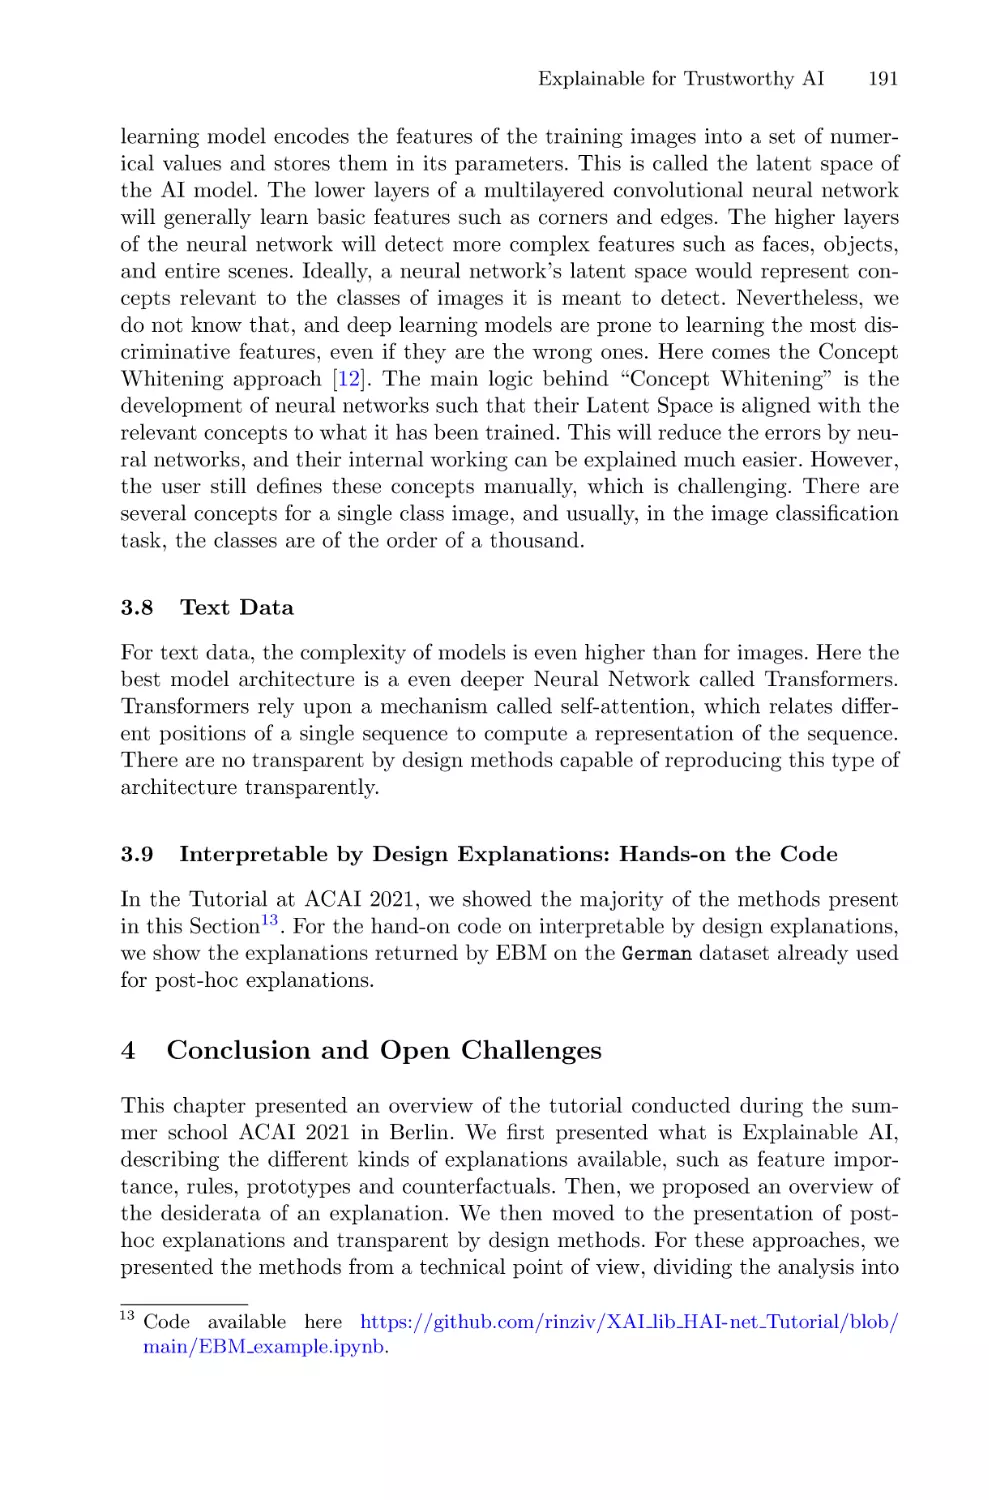 3.8 Text Data
3.9 Interpretable by Design Explanations
4 Conclusion and Open Challenges